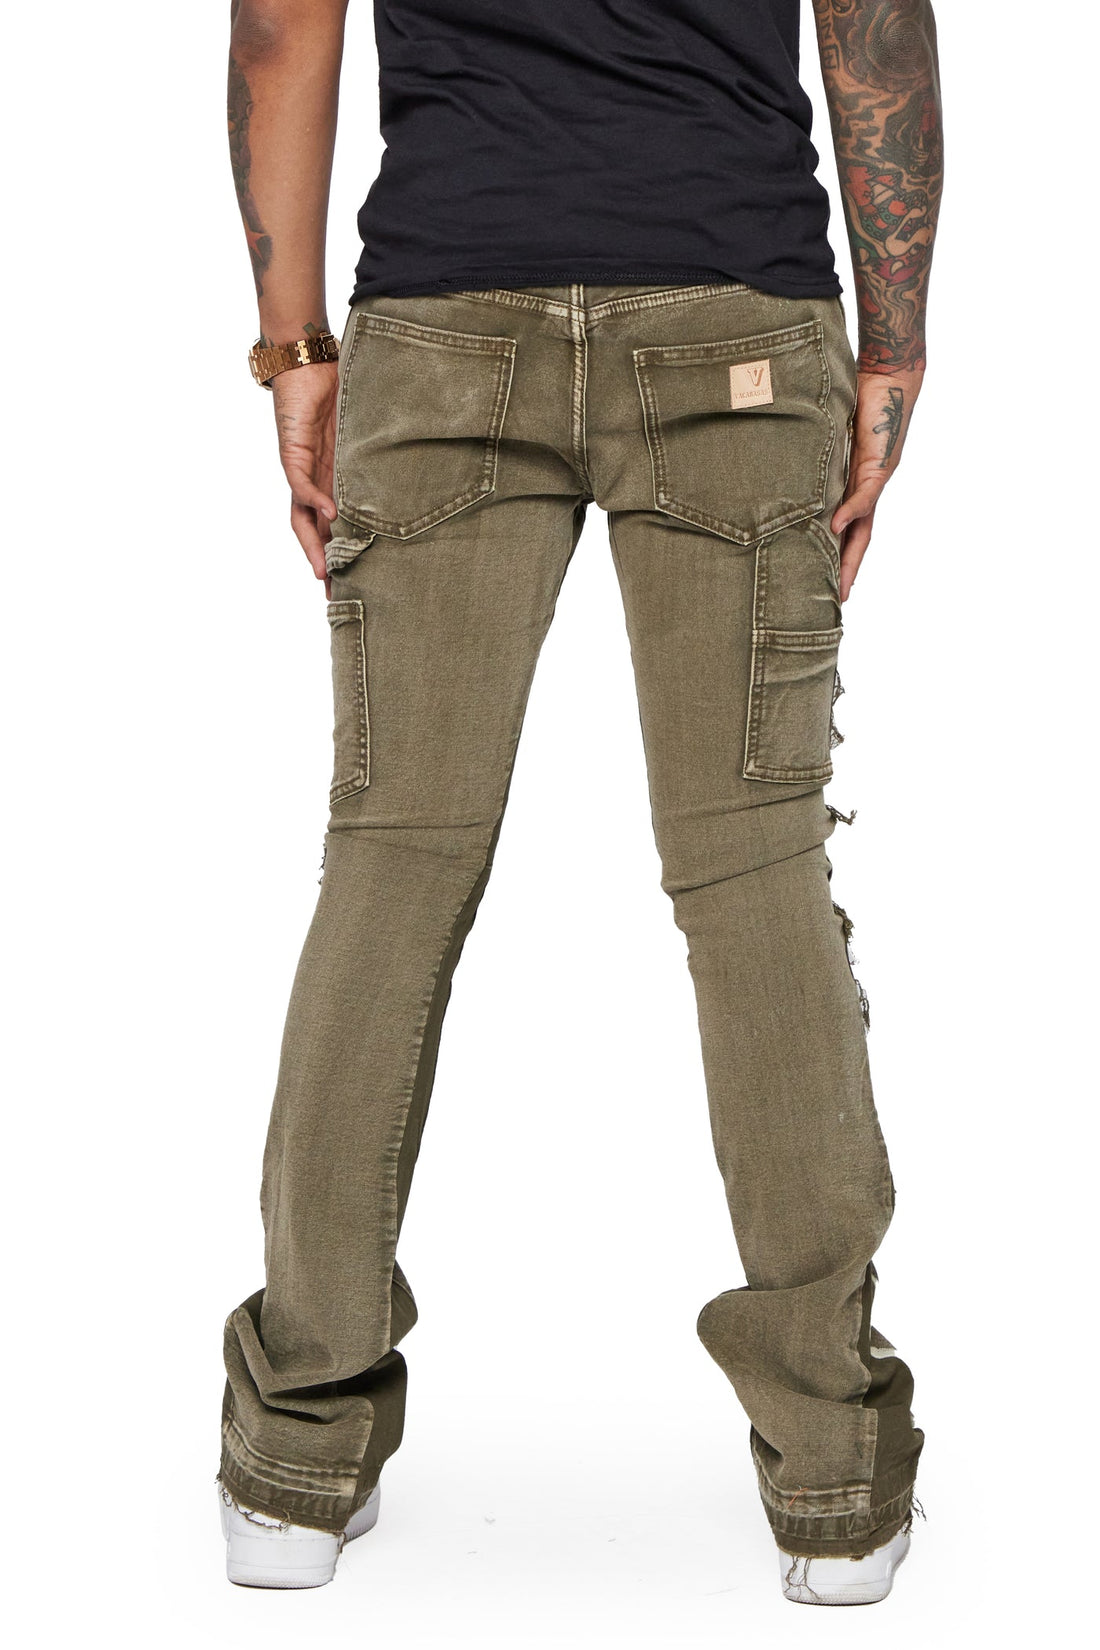 VALABASAS STACKED "ALPHA" OLIVE Jeans